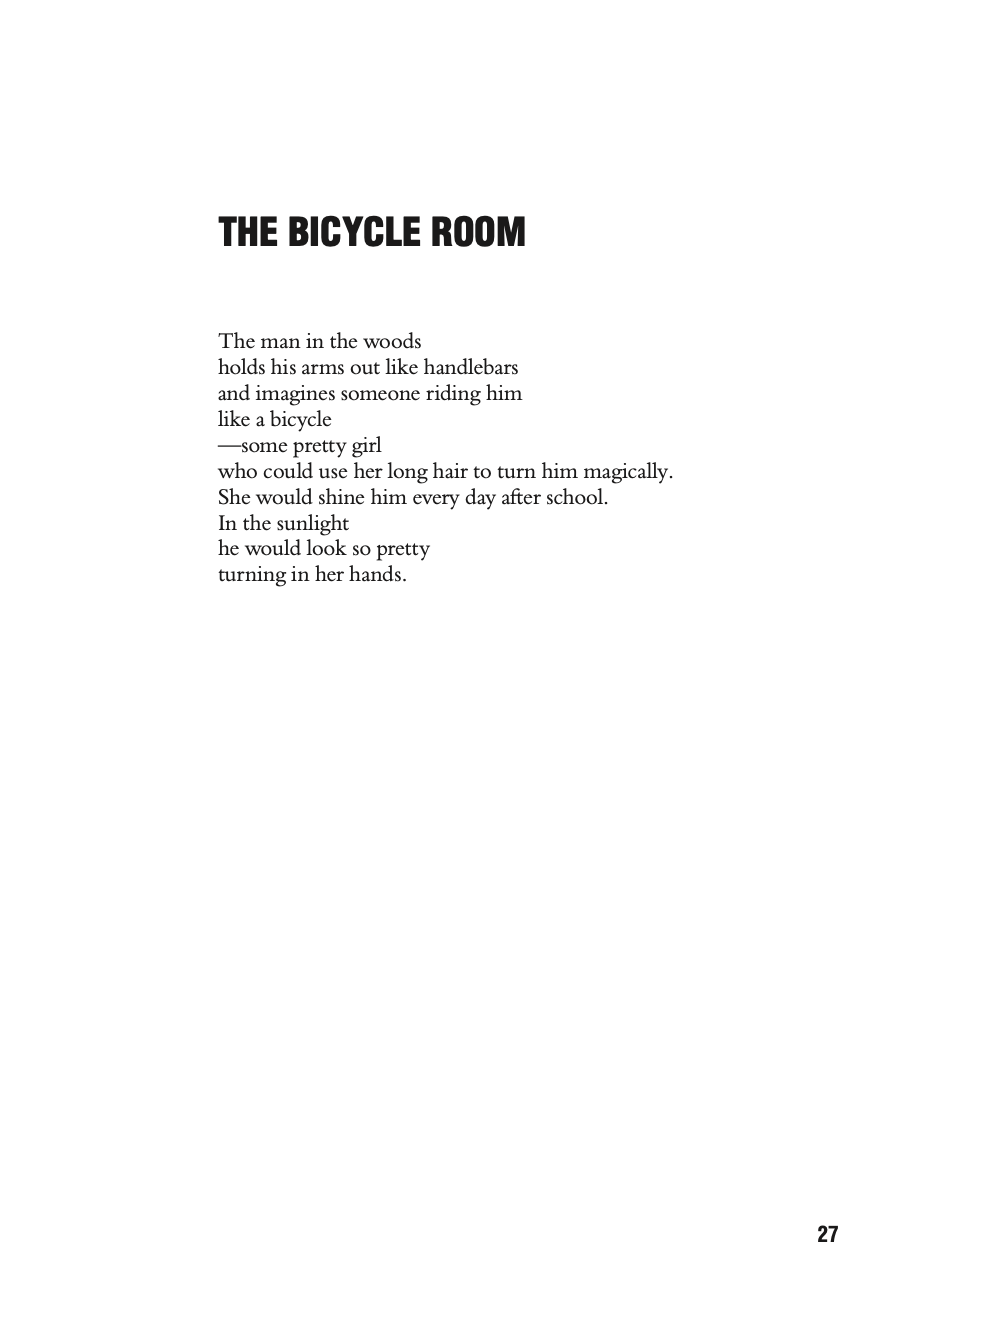 The Feather Room by Anis Mojgani